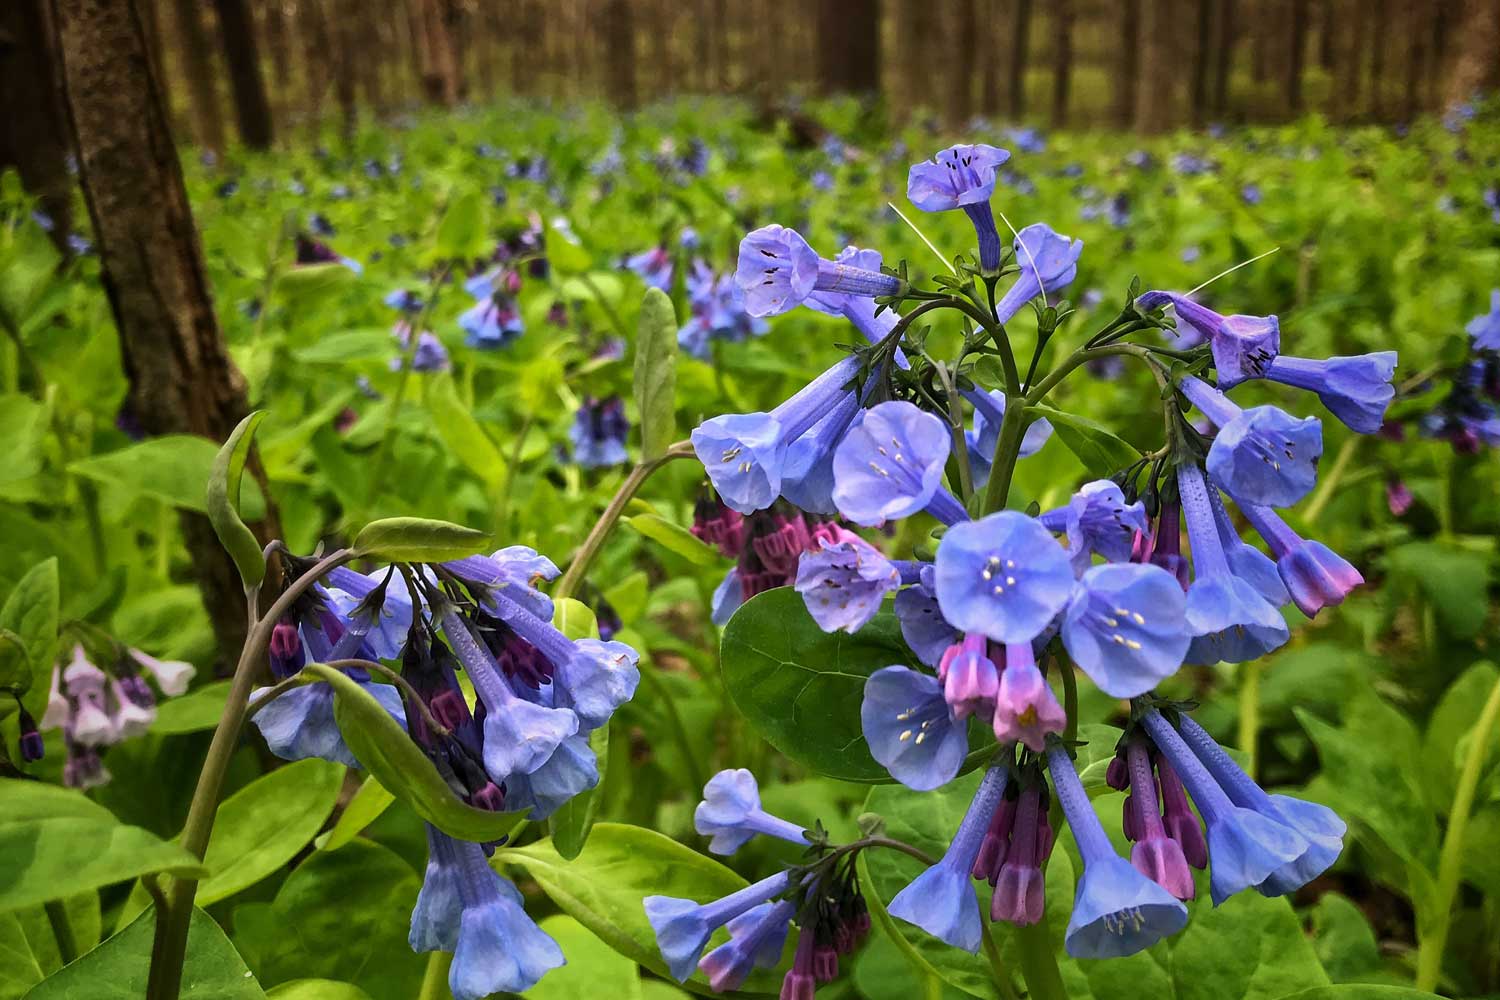 An up-close photo of bluebell blooms on the forest floor.